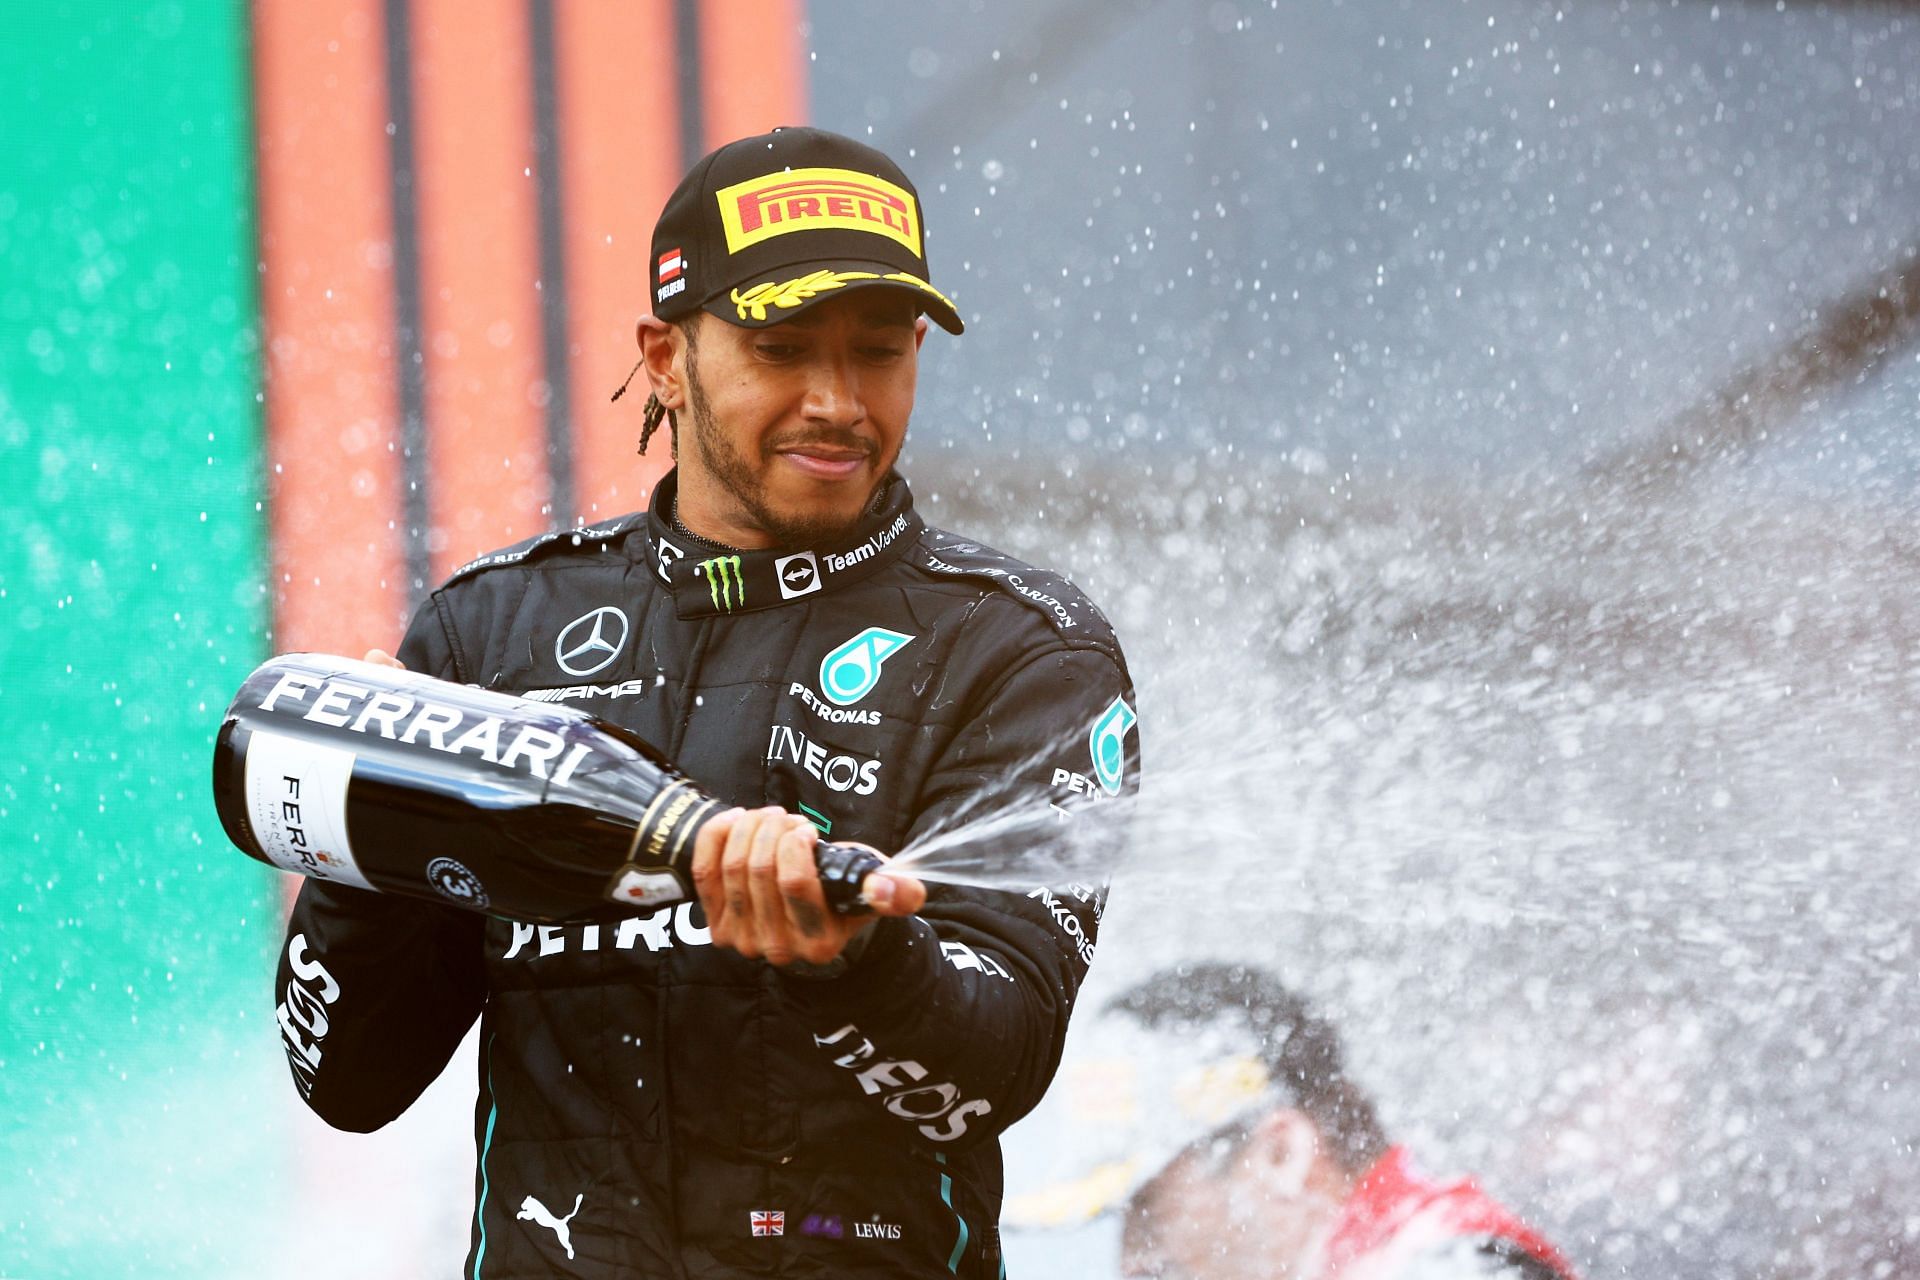 Lewis Hamilton will be taking part in his 300th race at Circuit Paul Ricard